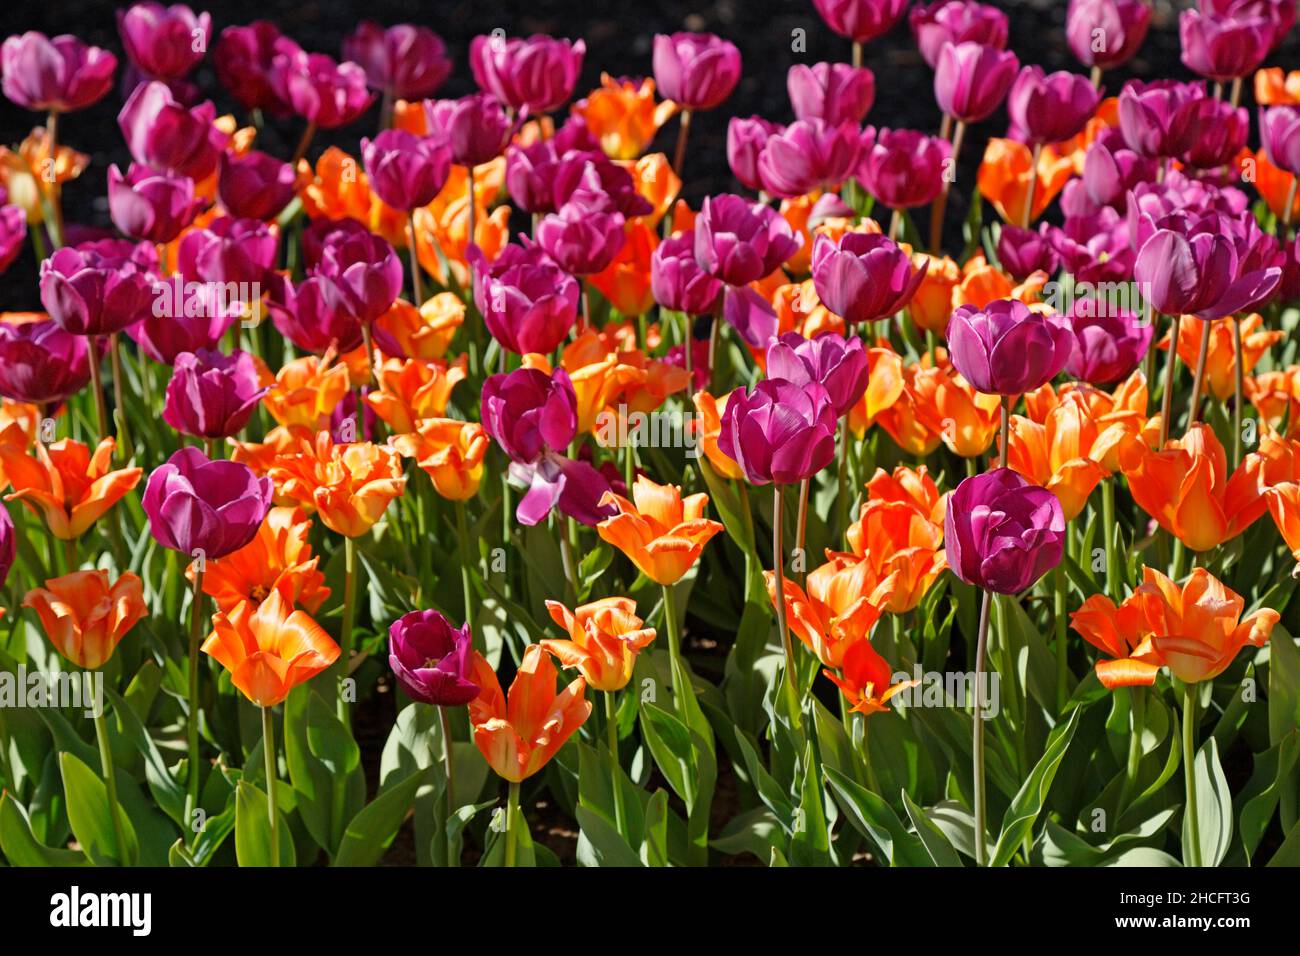 Purple and Orange Tulips in a flower bed, North Carolina Stock Photo